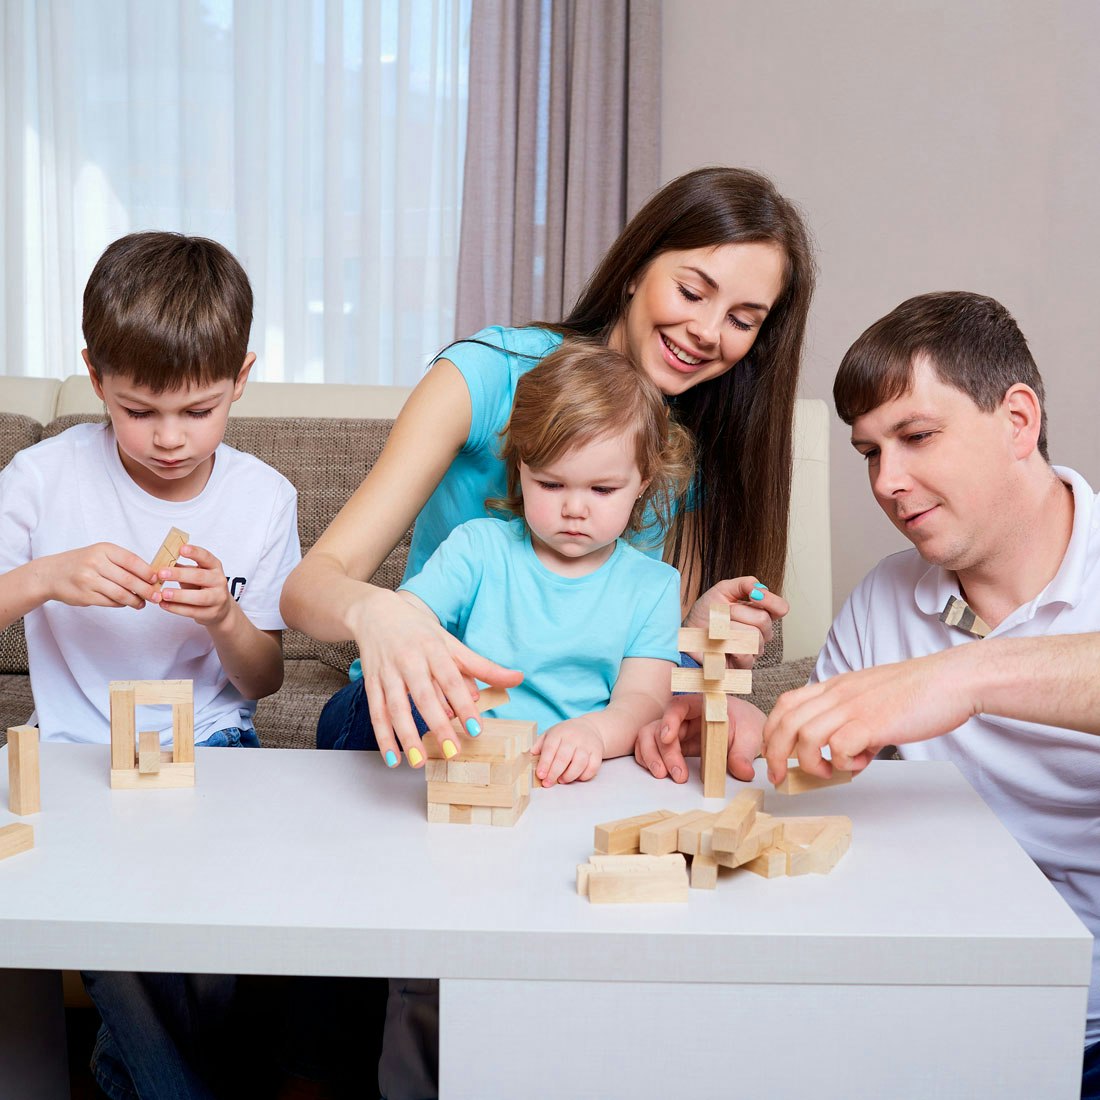 family-playing-building-with-blocks-on-table.jpg